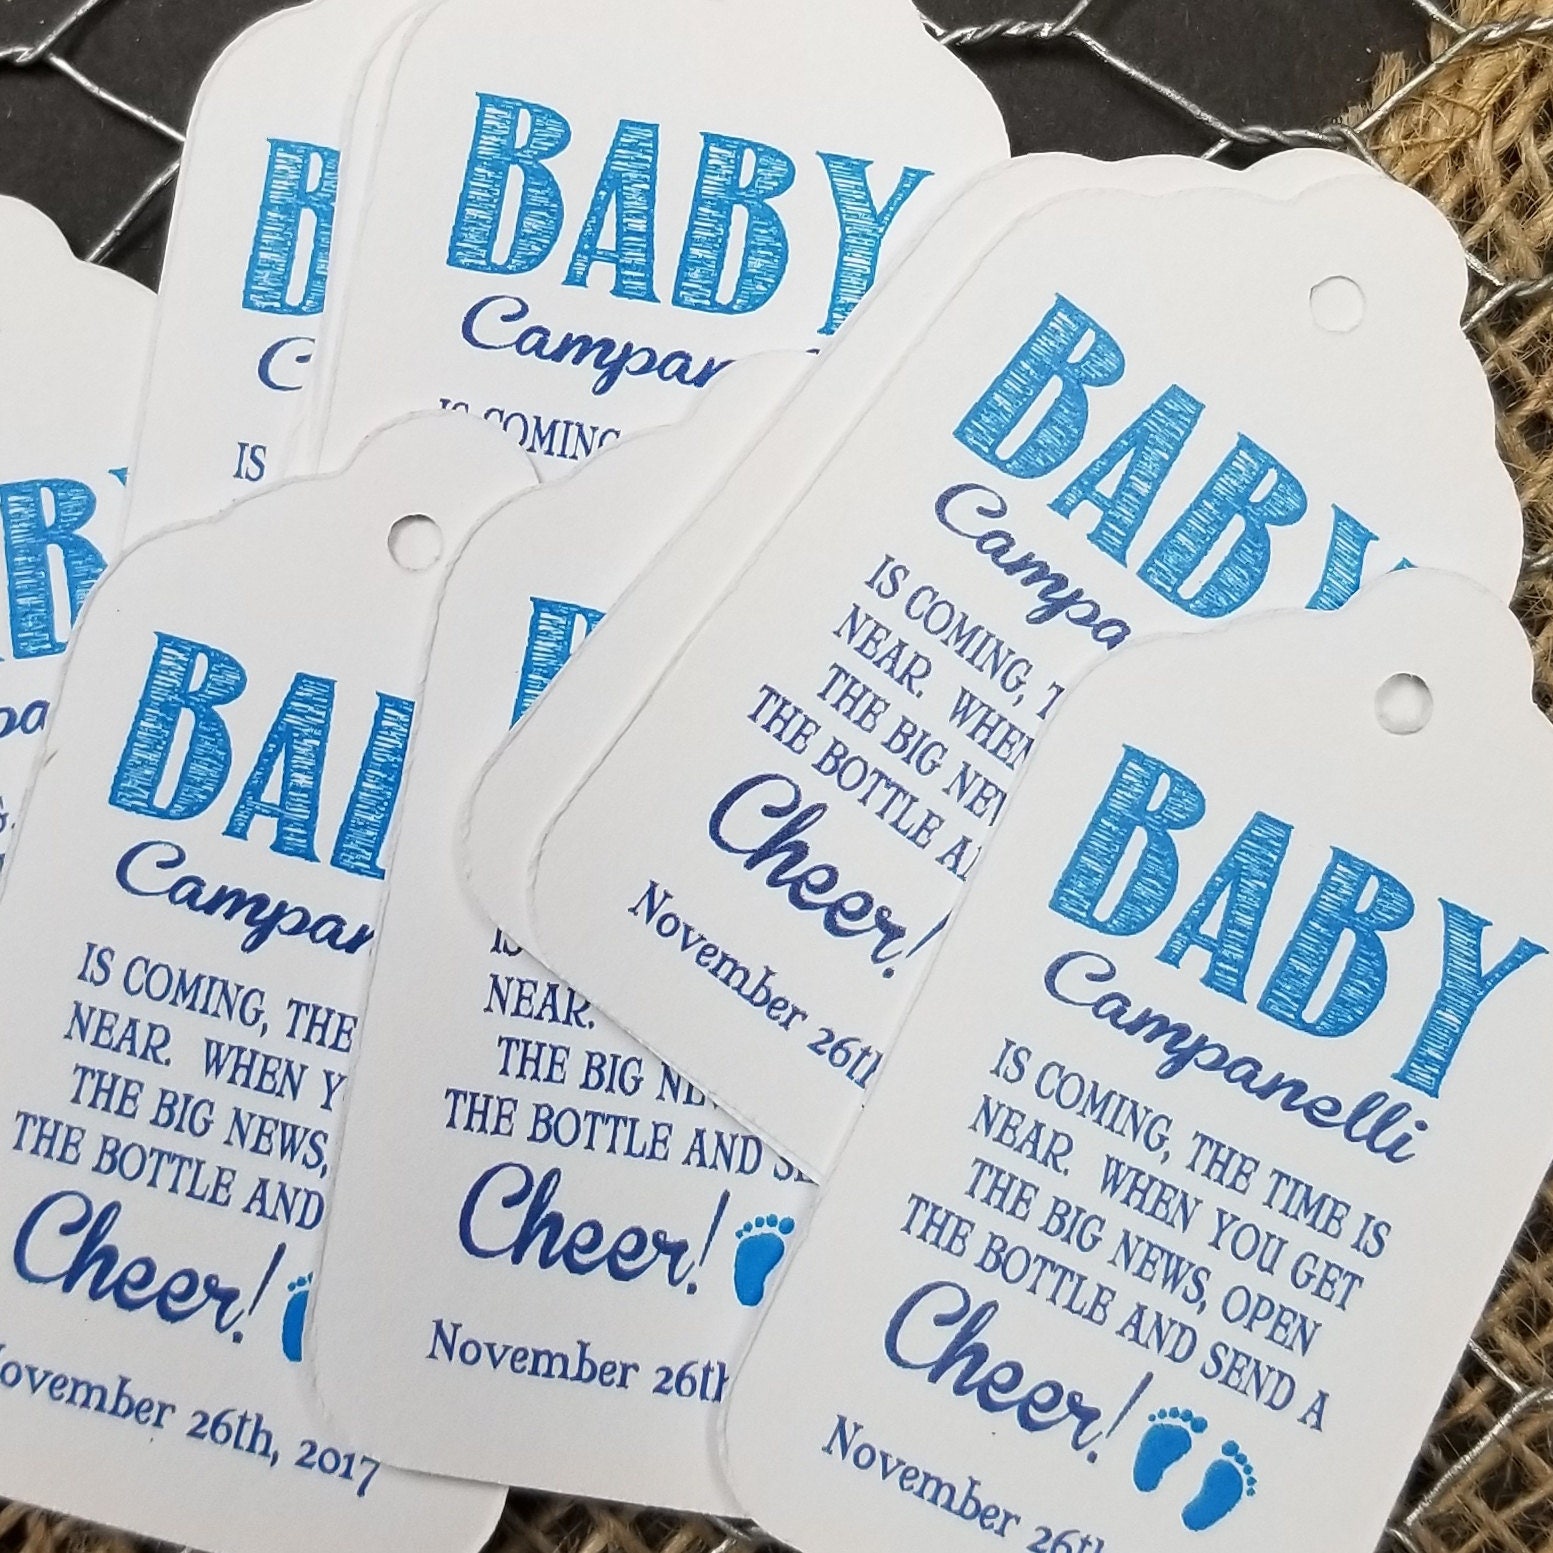 Baby is coming the Time in Near open the bottle Cheer favor tag MEDIUM Tags ...